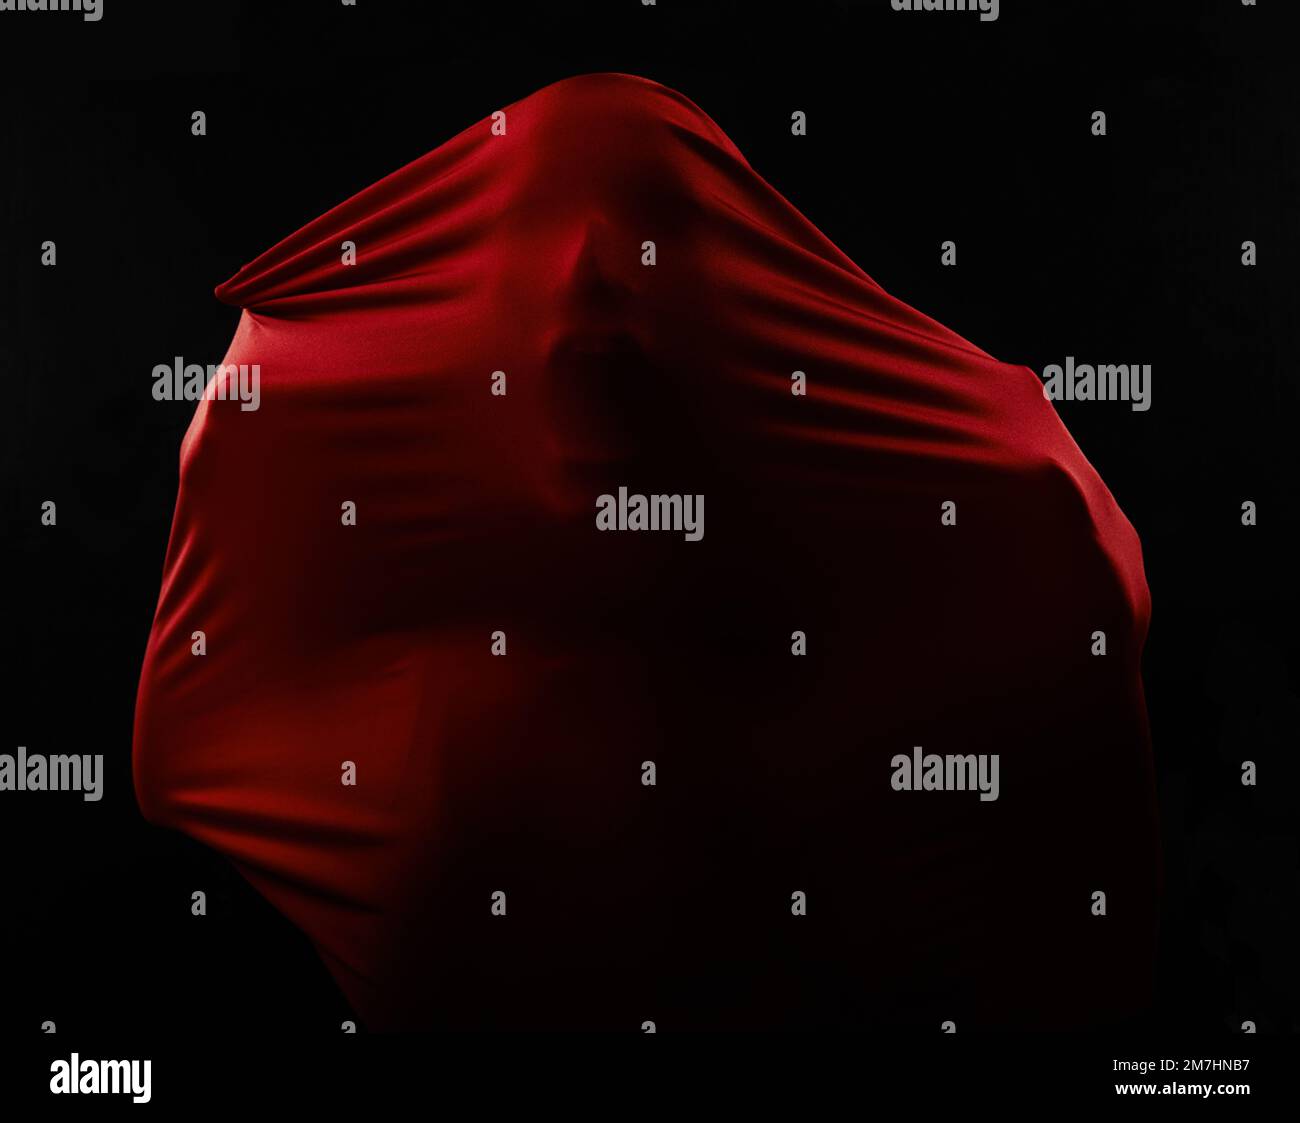 Trapped by fear. Human figures trapped in red fabric and struggling to break free while isolated on black. Stock Photo